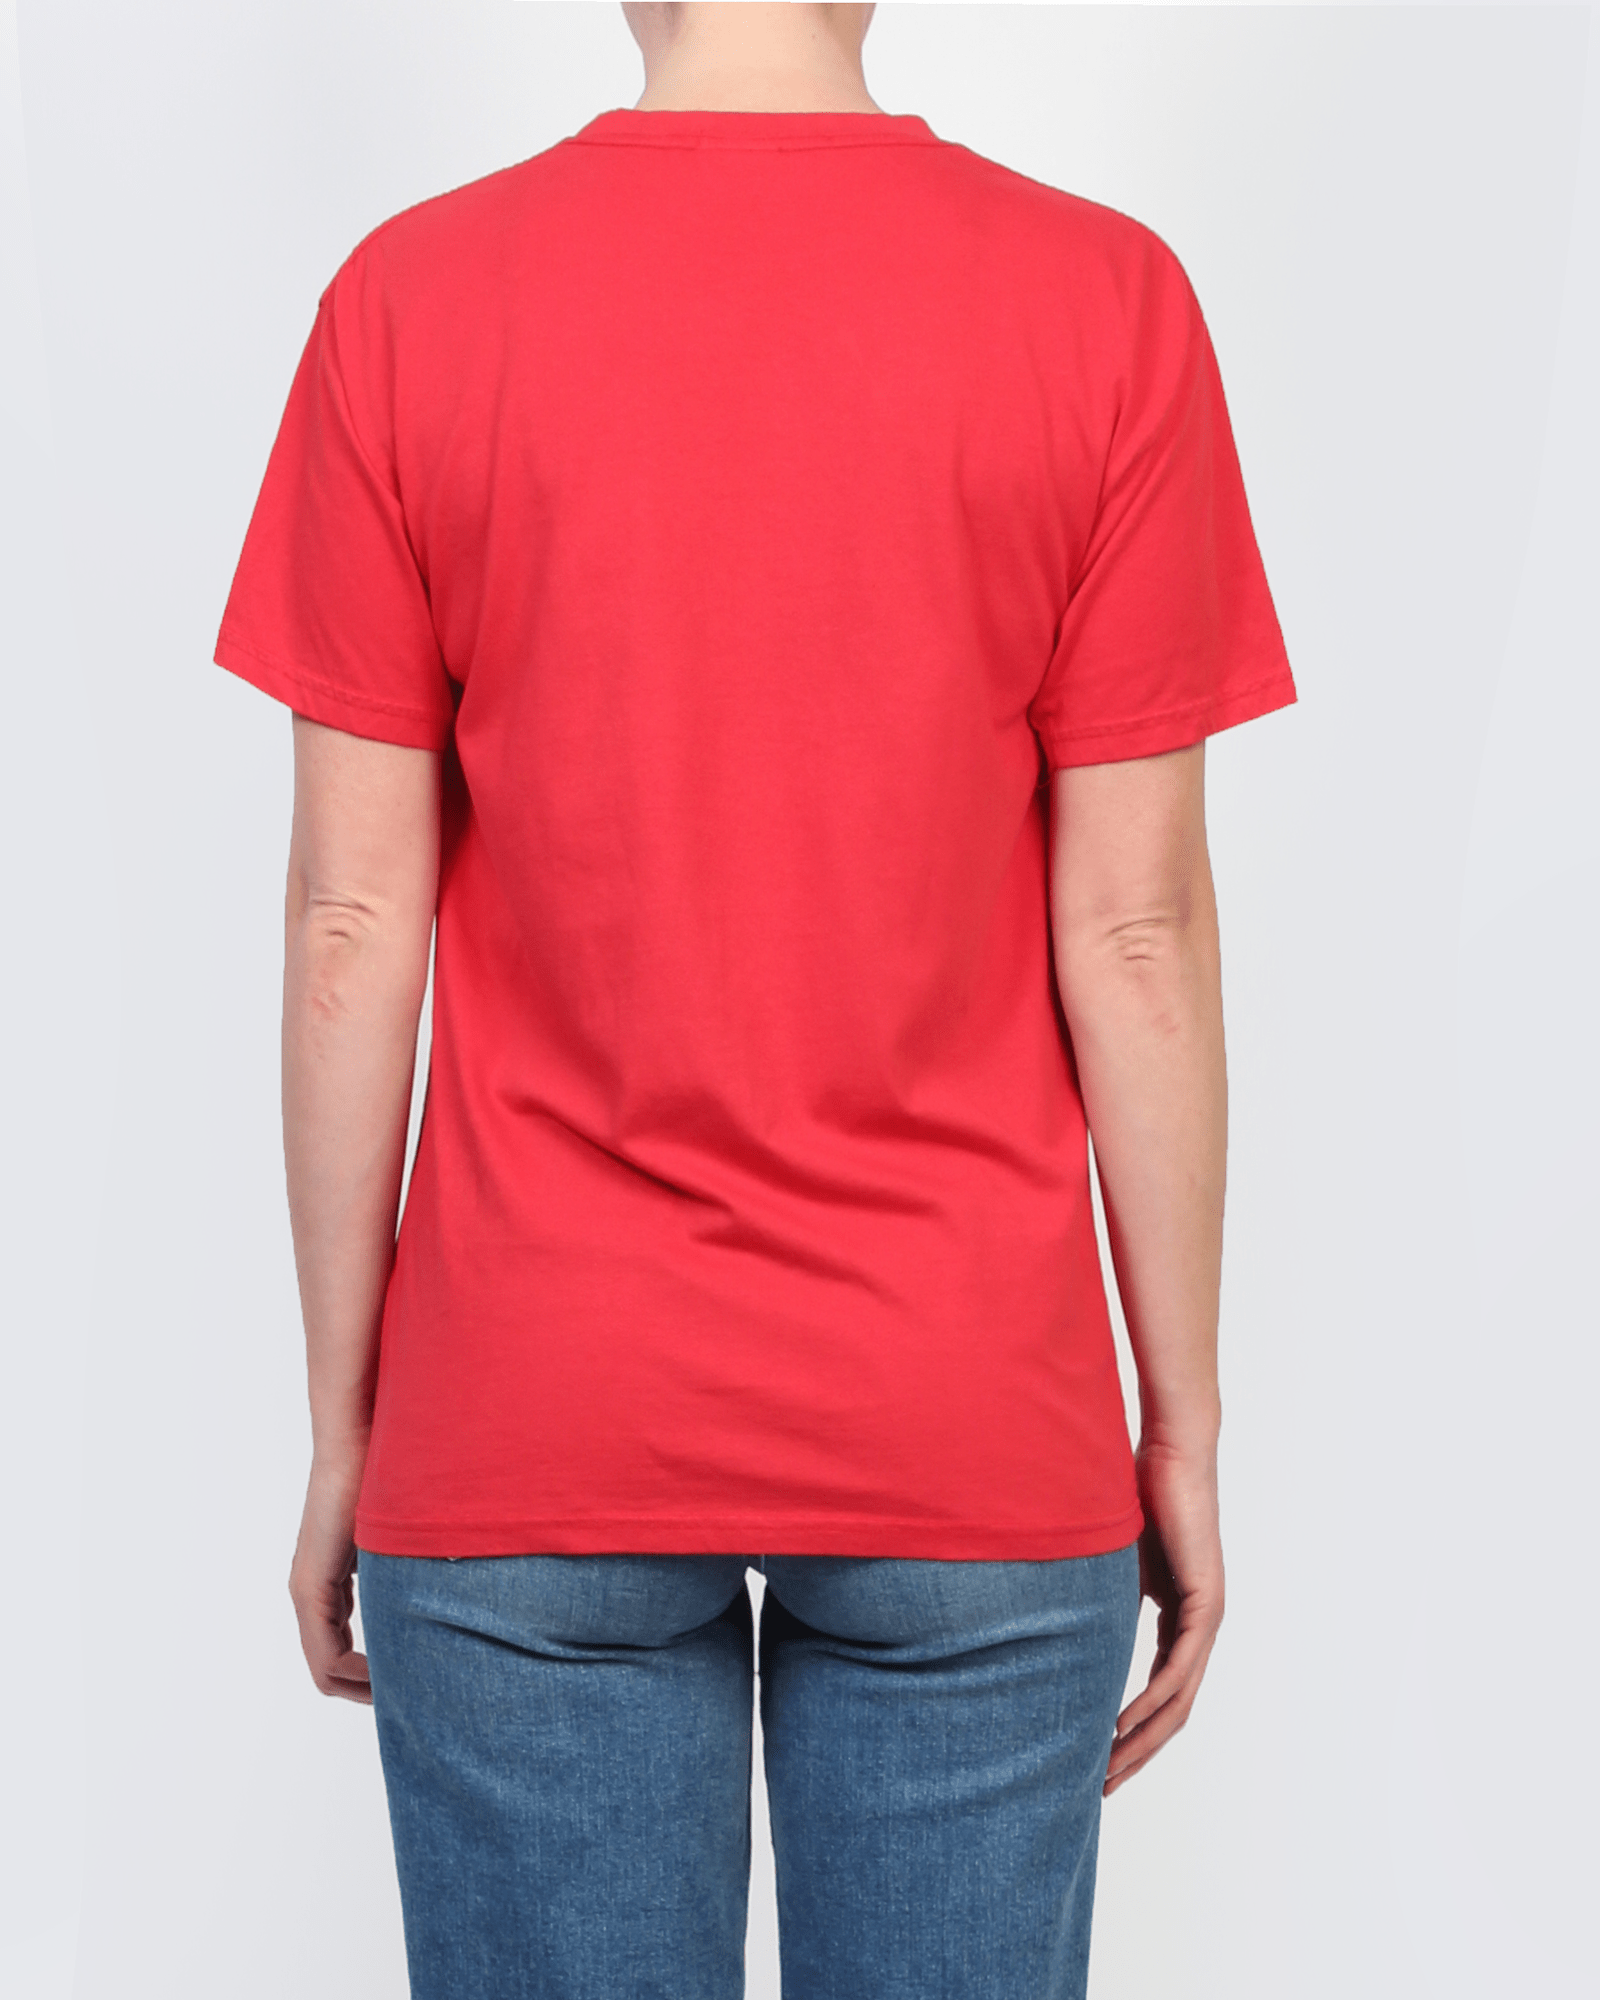 Real Thing T-Shirt - True Red